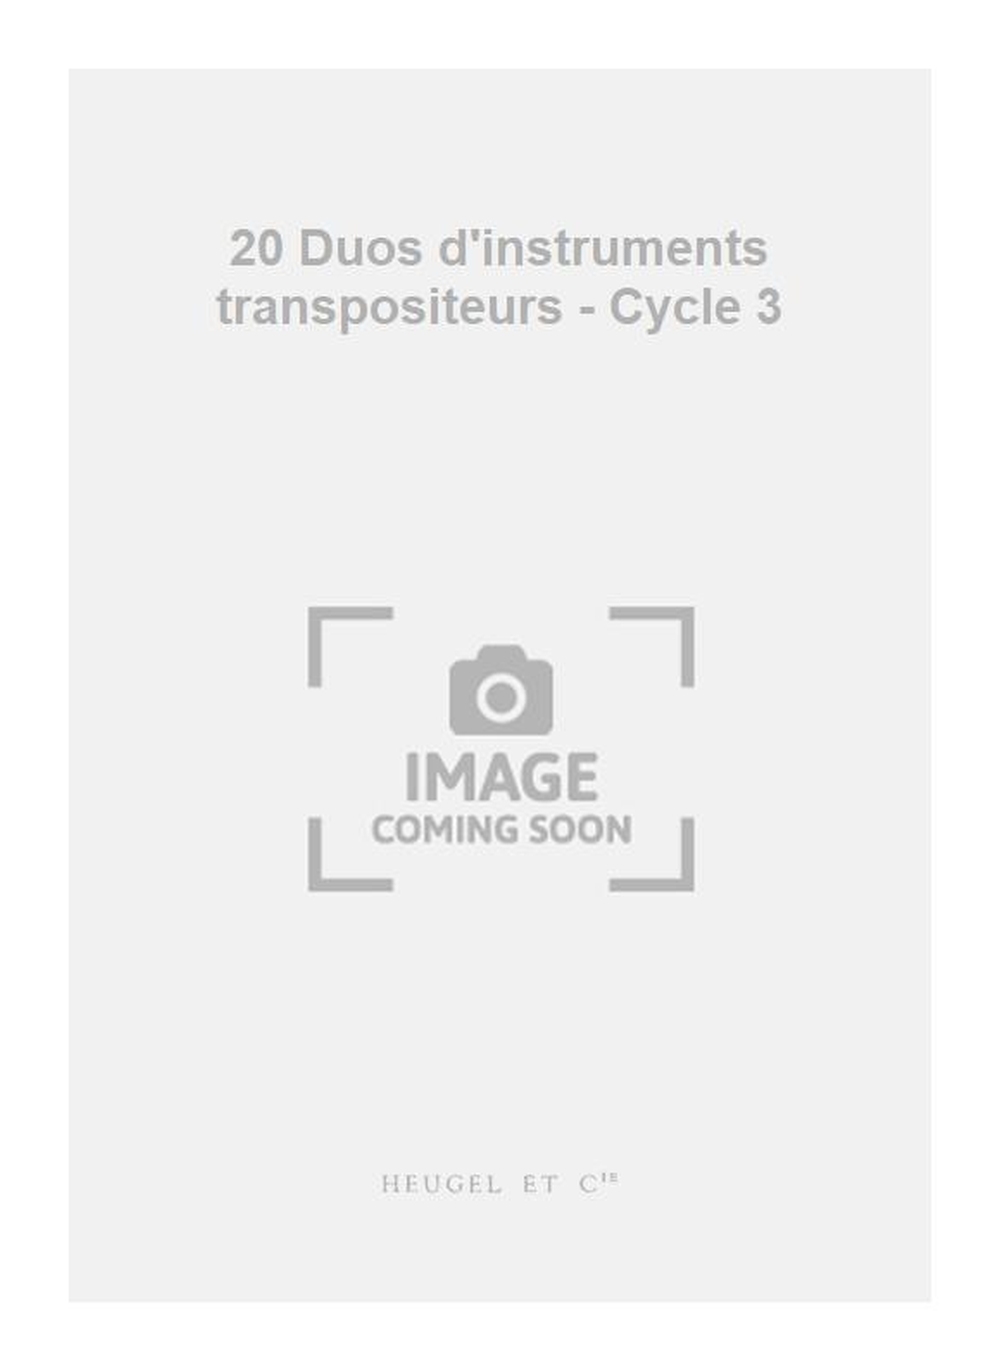 Yves Callier: 20 Duos d'instruments transpositeurs - Cycle 3: Solfege